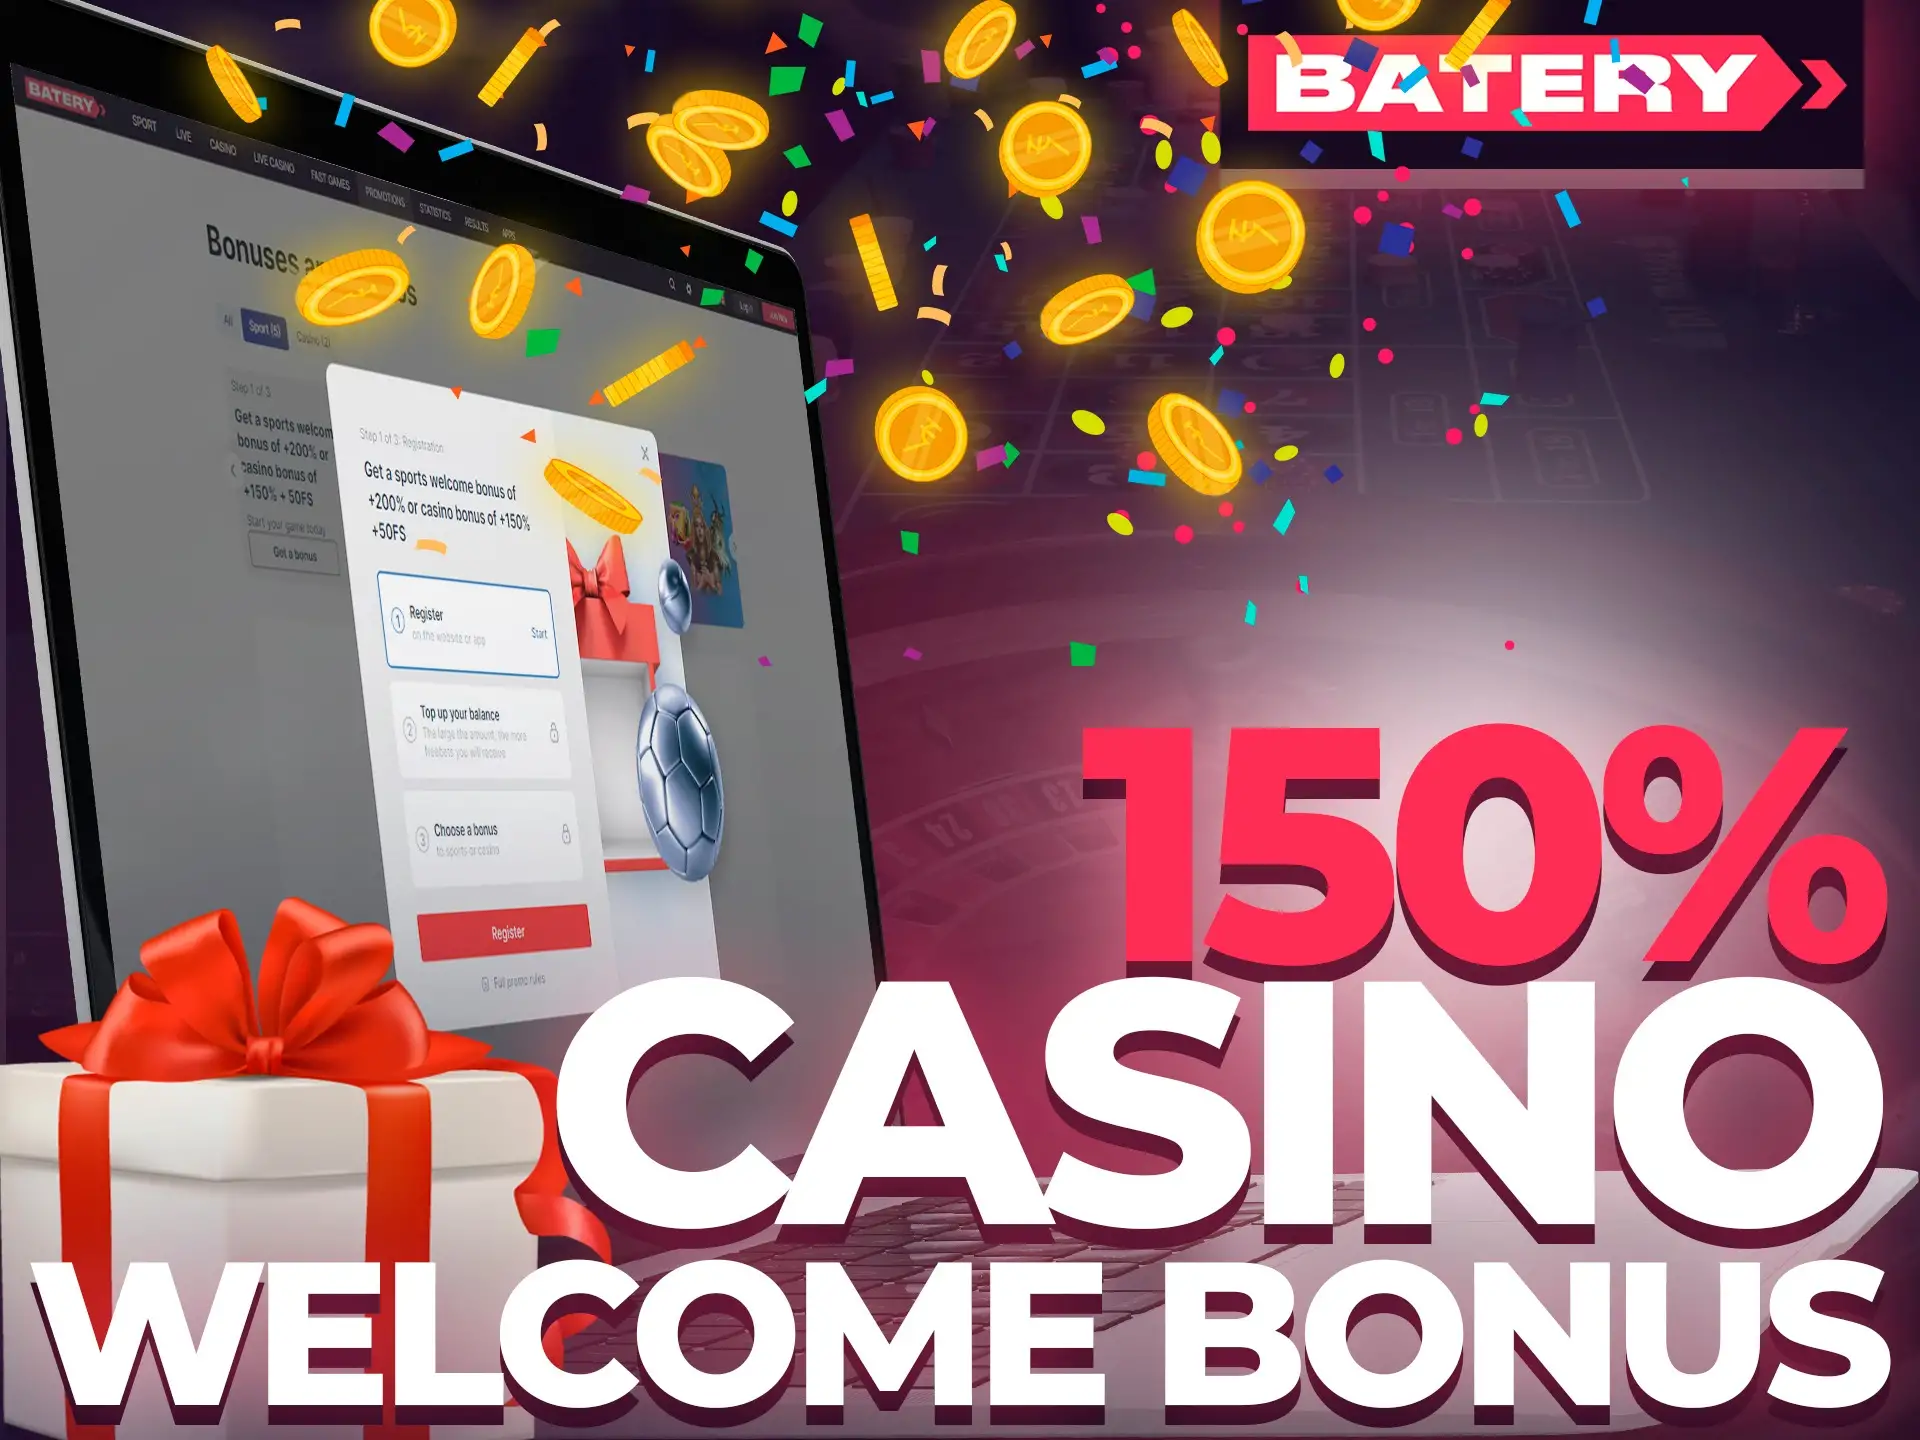 Choose your casino bonus during registering a Batery account.